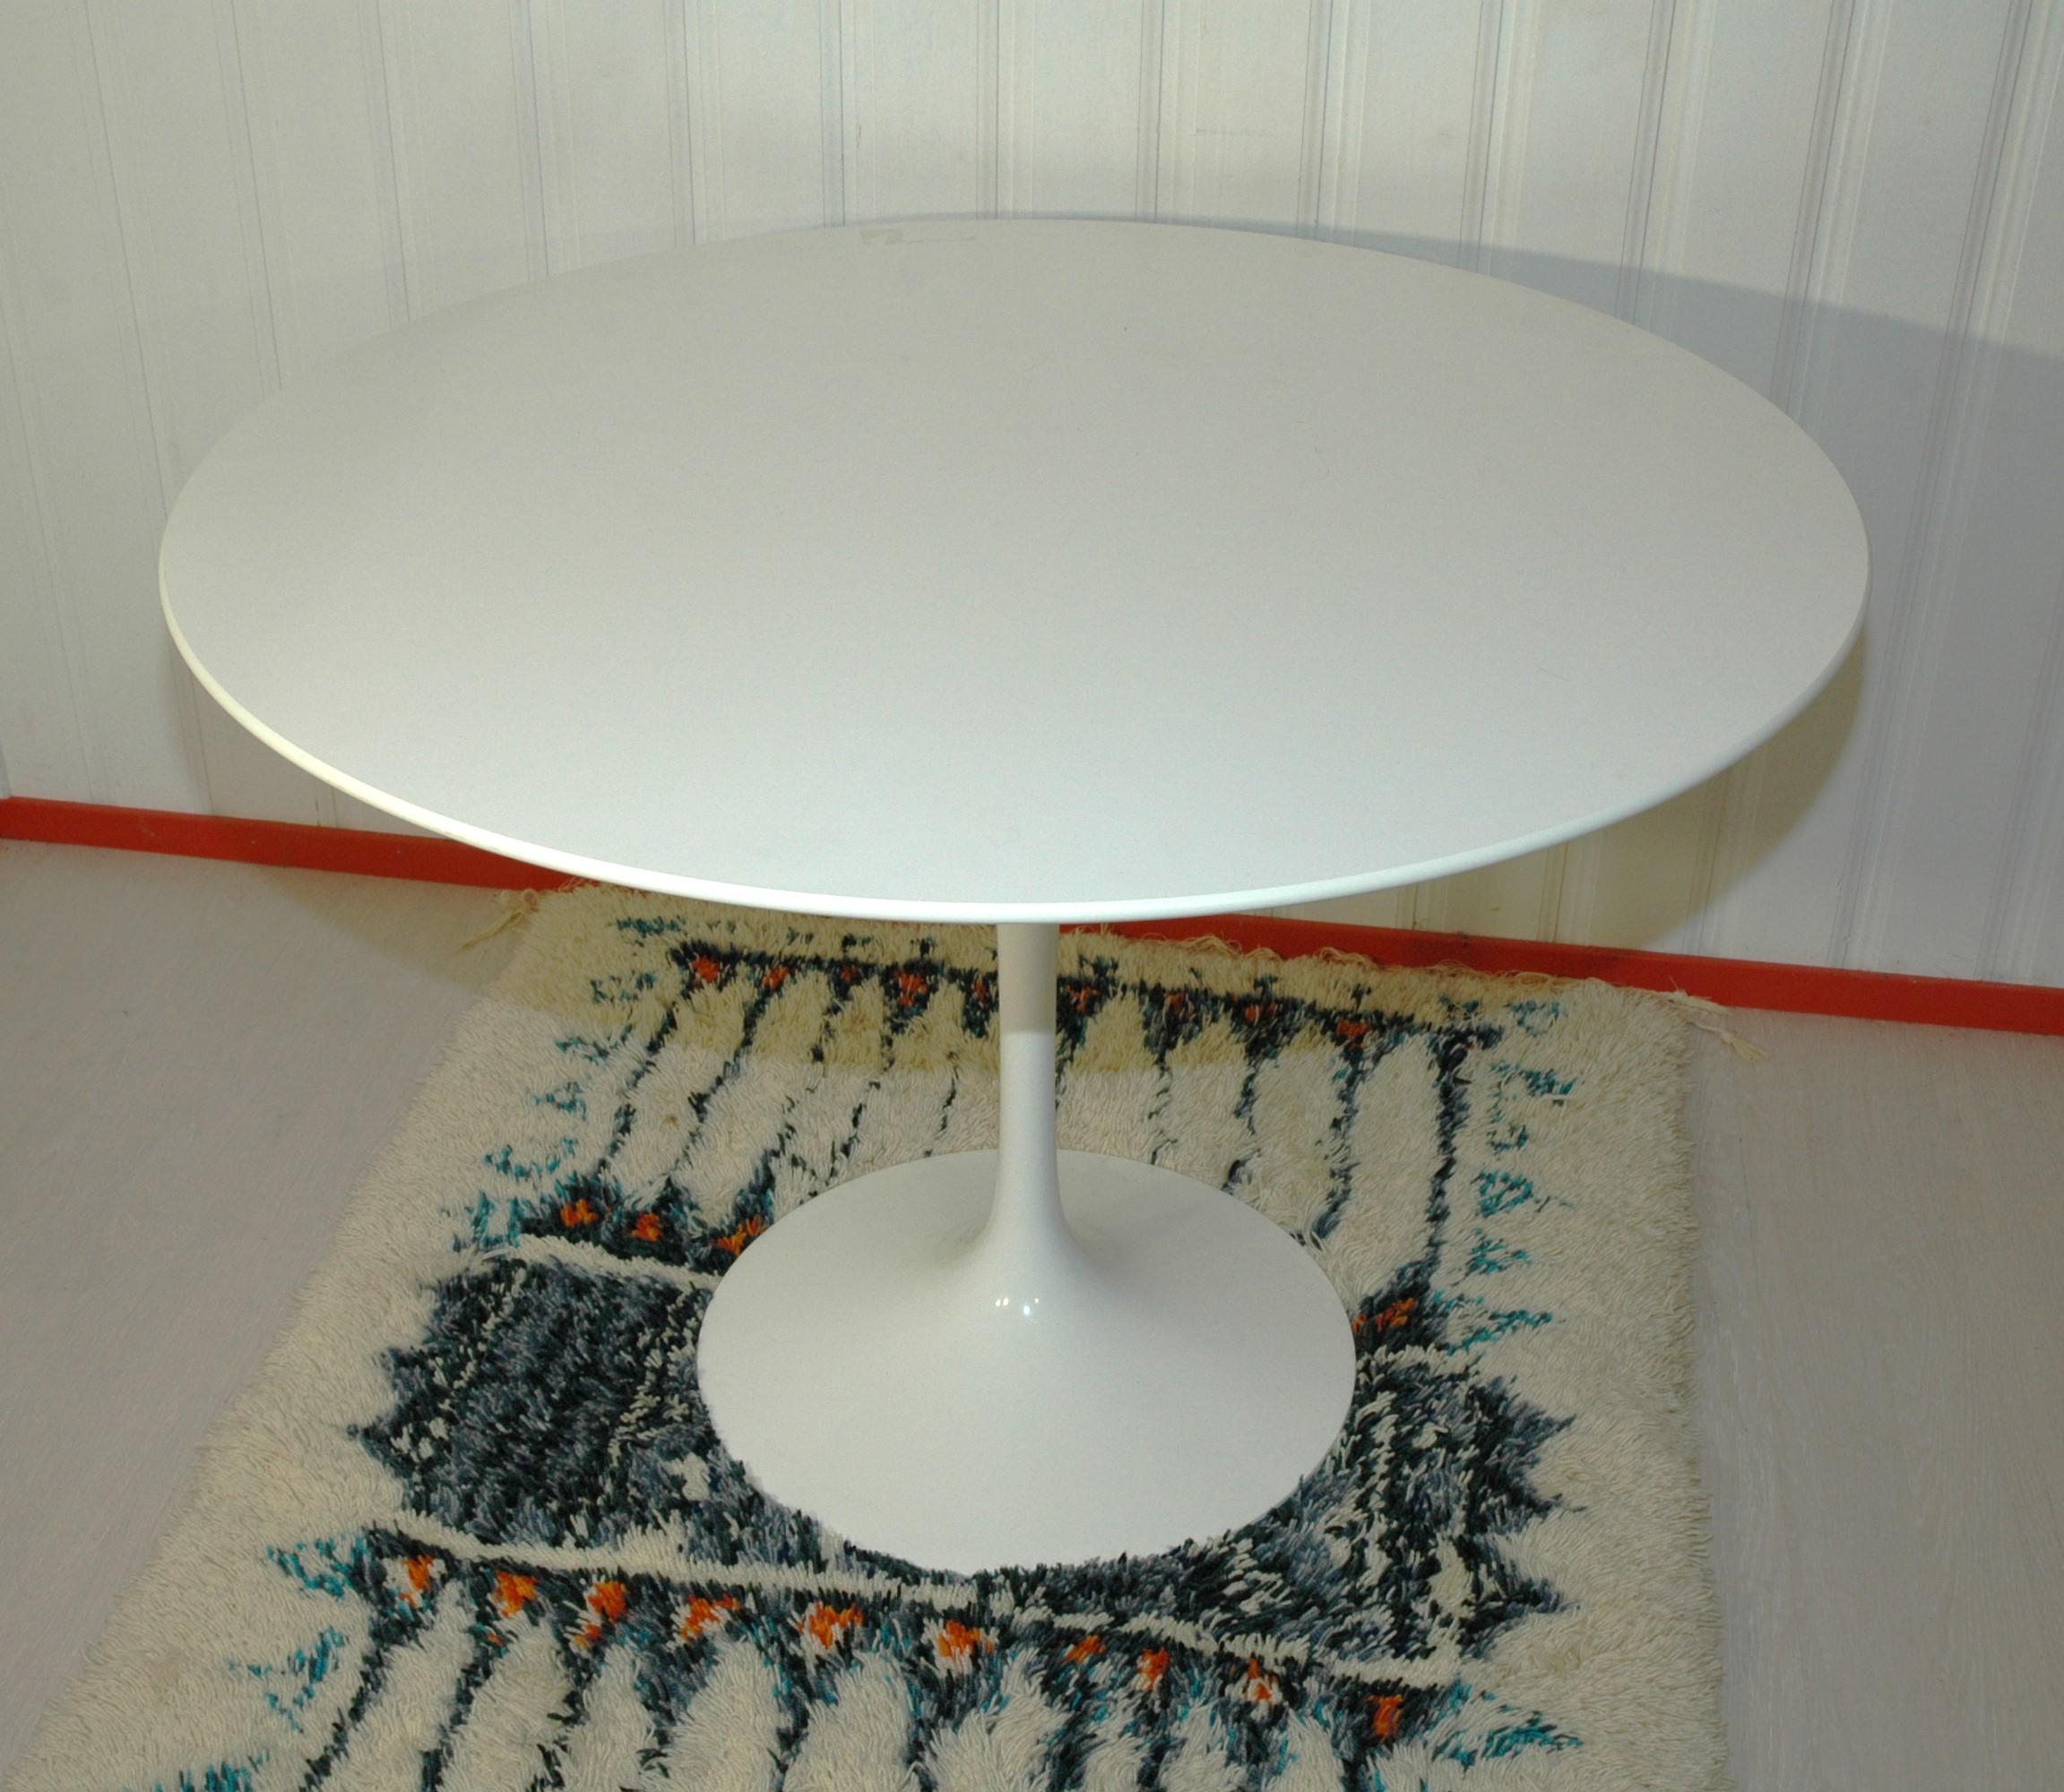 Eero Saarinen has really succeeded in his beautiful and flexible design of perhaps the strongest table design Tulip. A design that follows the same design language as the Executive chair and The Arch.

Finnish-American architect and furniture